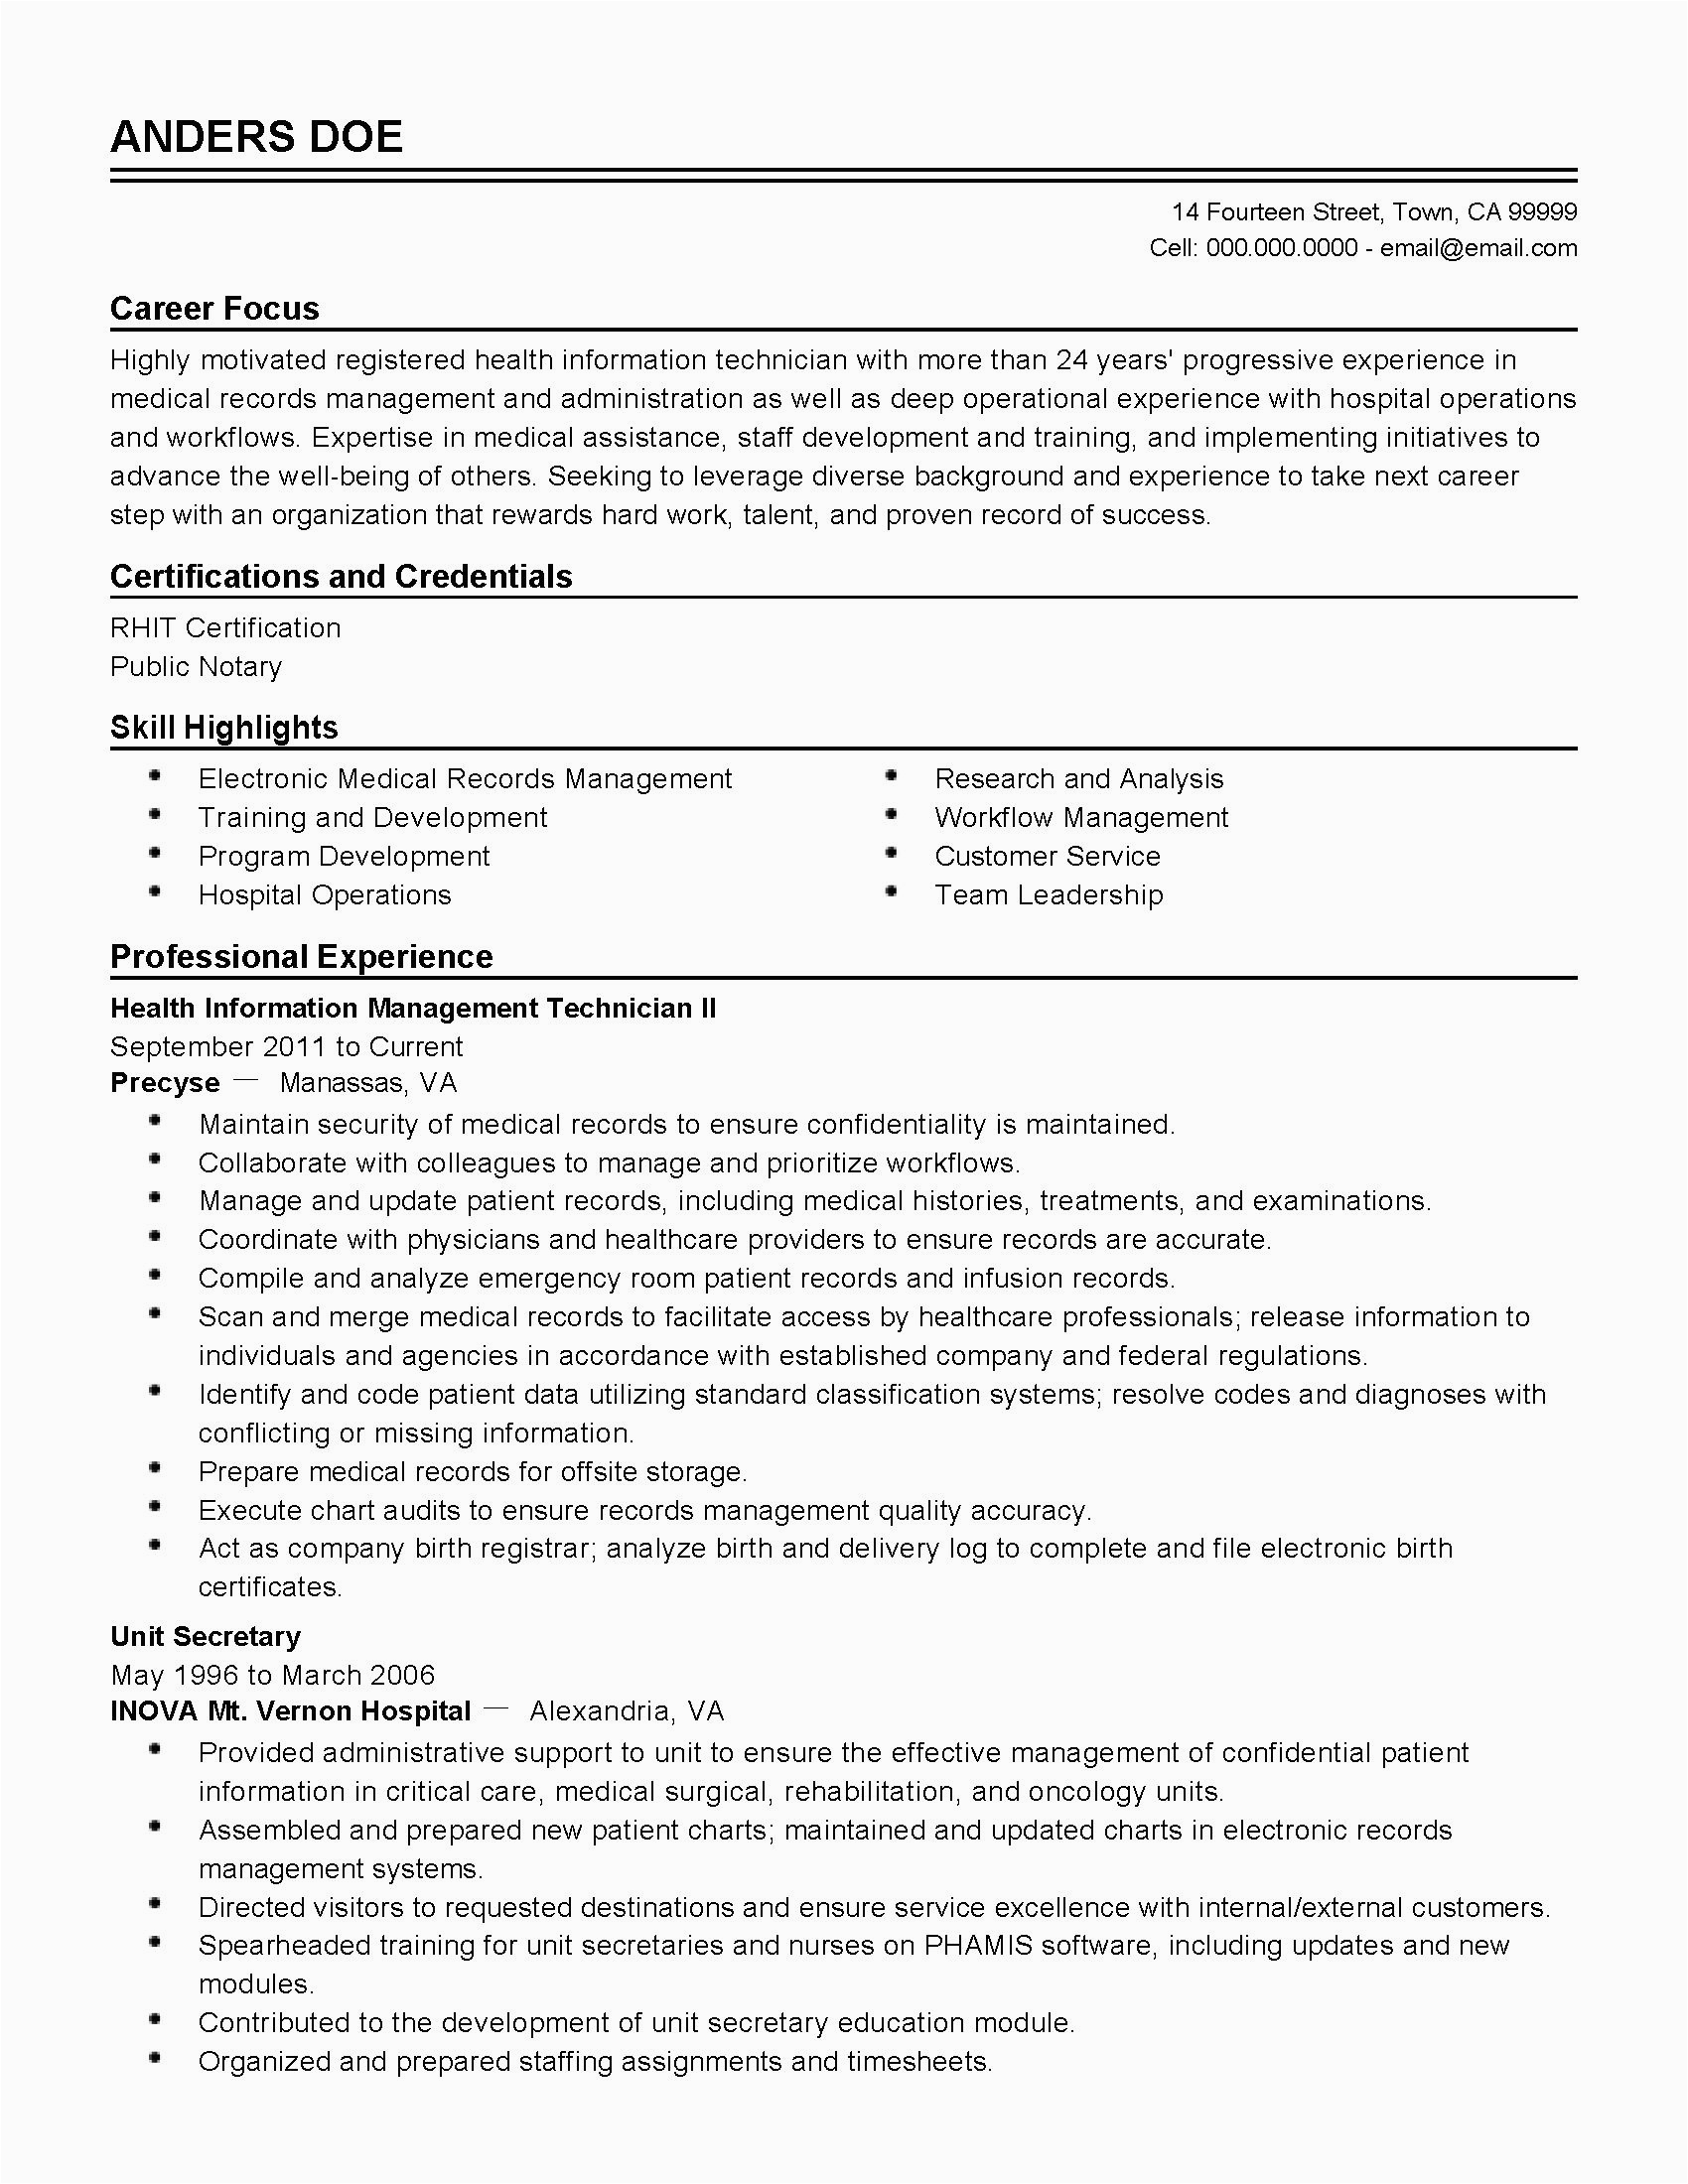 Sample Resume Objective for Health Professionals Health Information Management Resume Lovely Professional Health